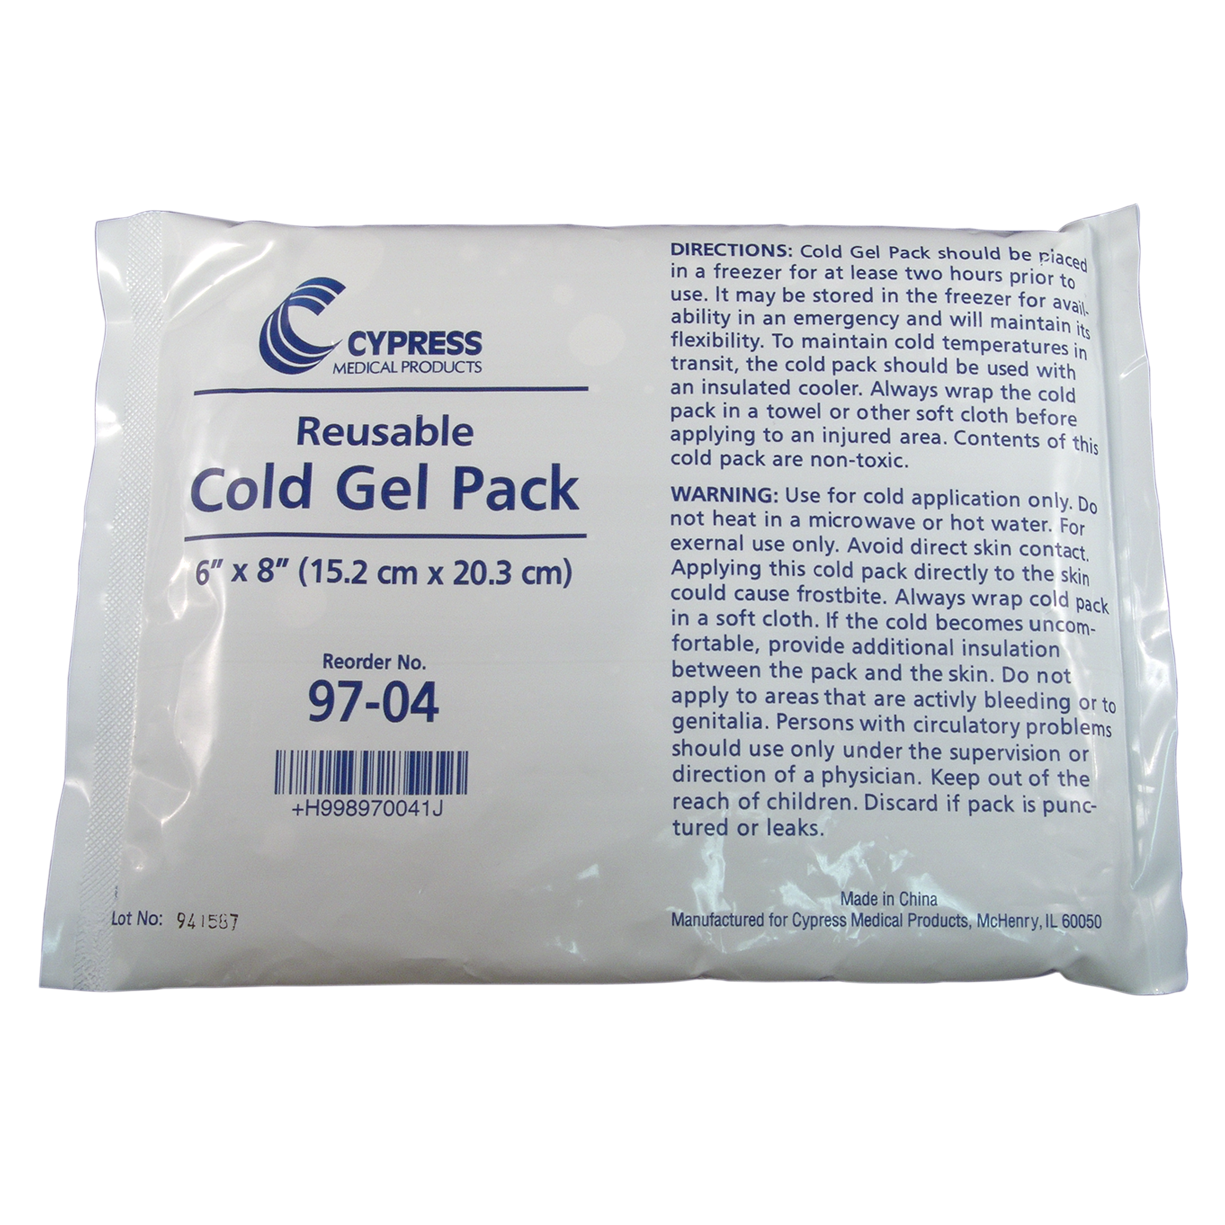 Reusable Cold Gel Pack